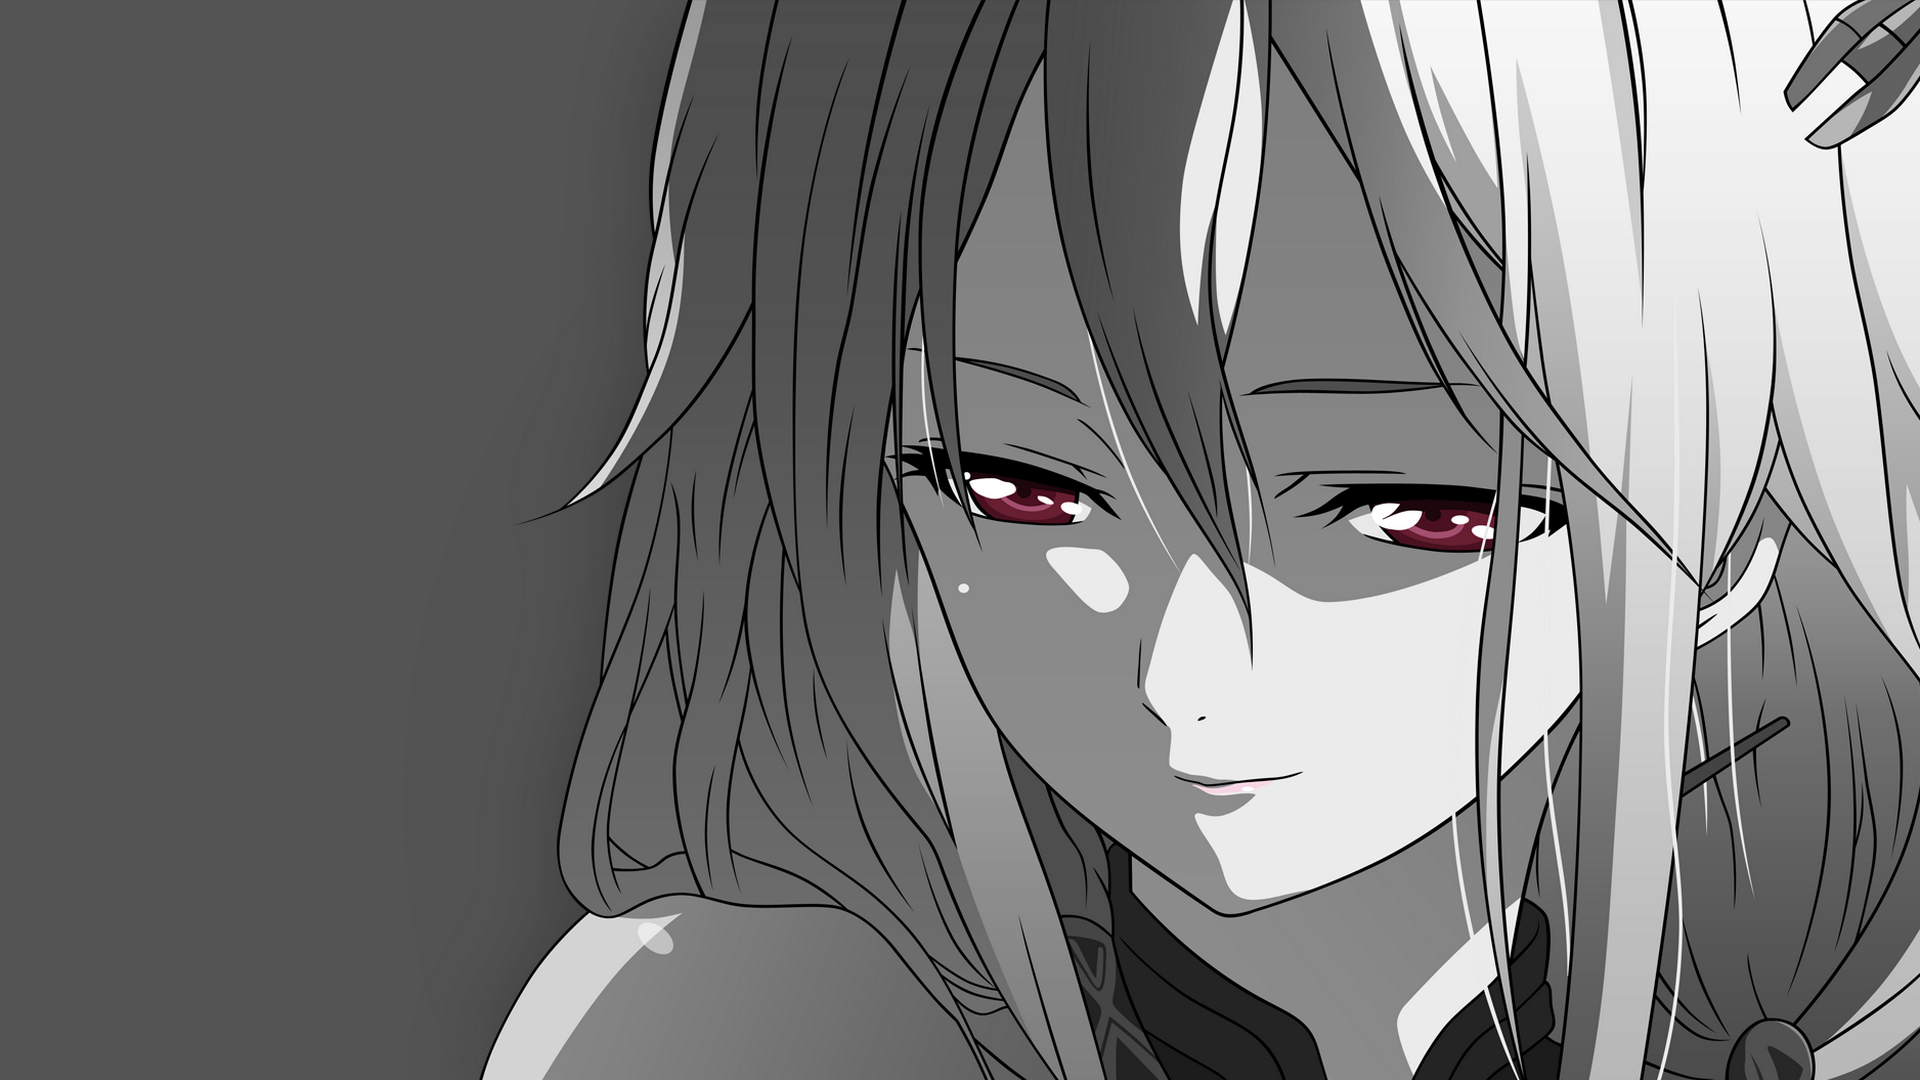 Anime 1920x1080 manga anime girls anime selective coloring red eyes face hair in face closeup